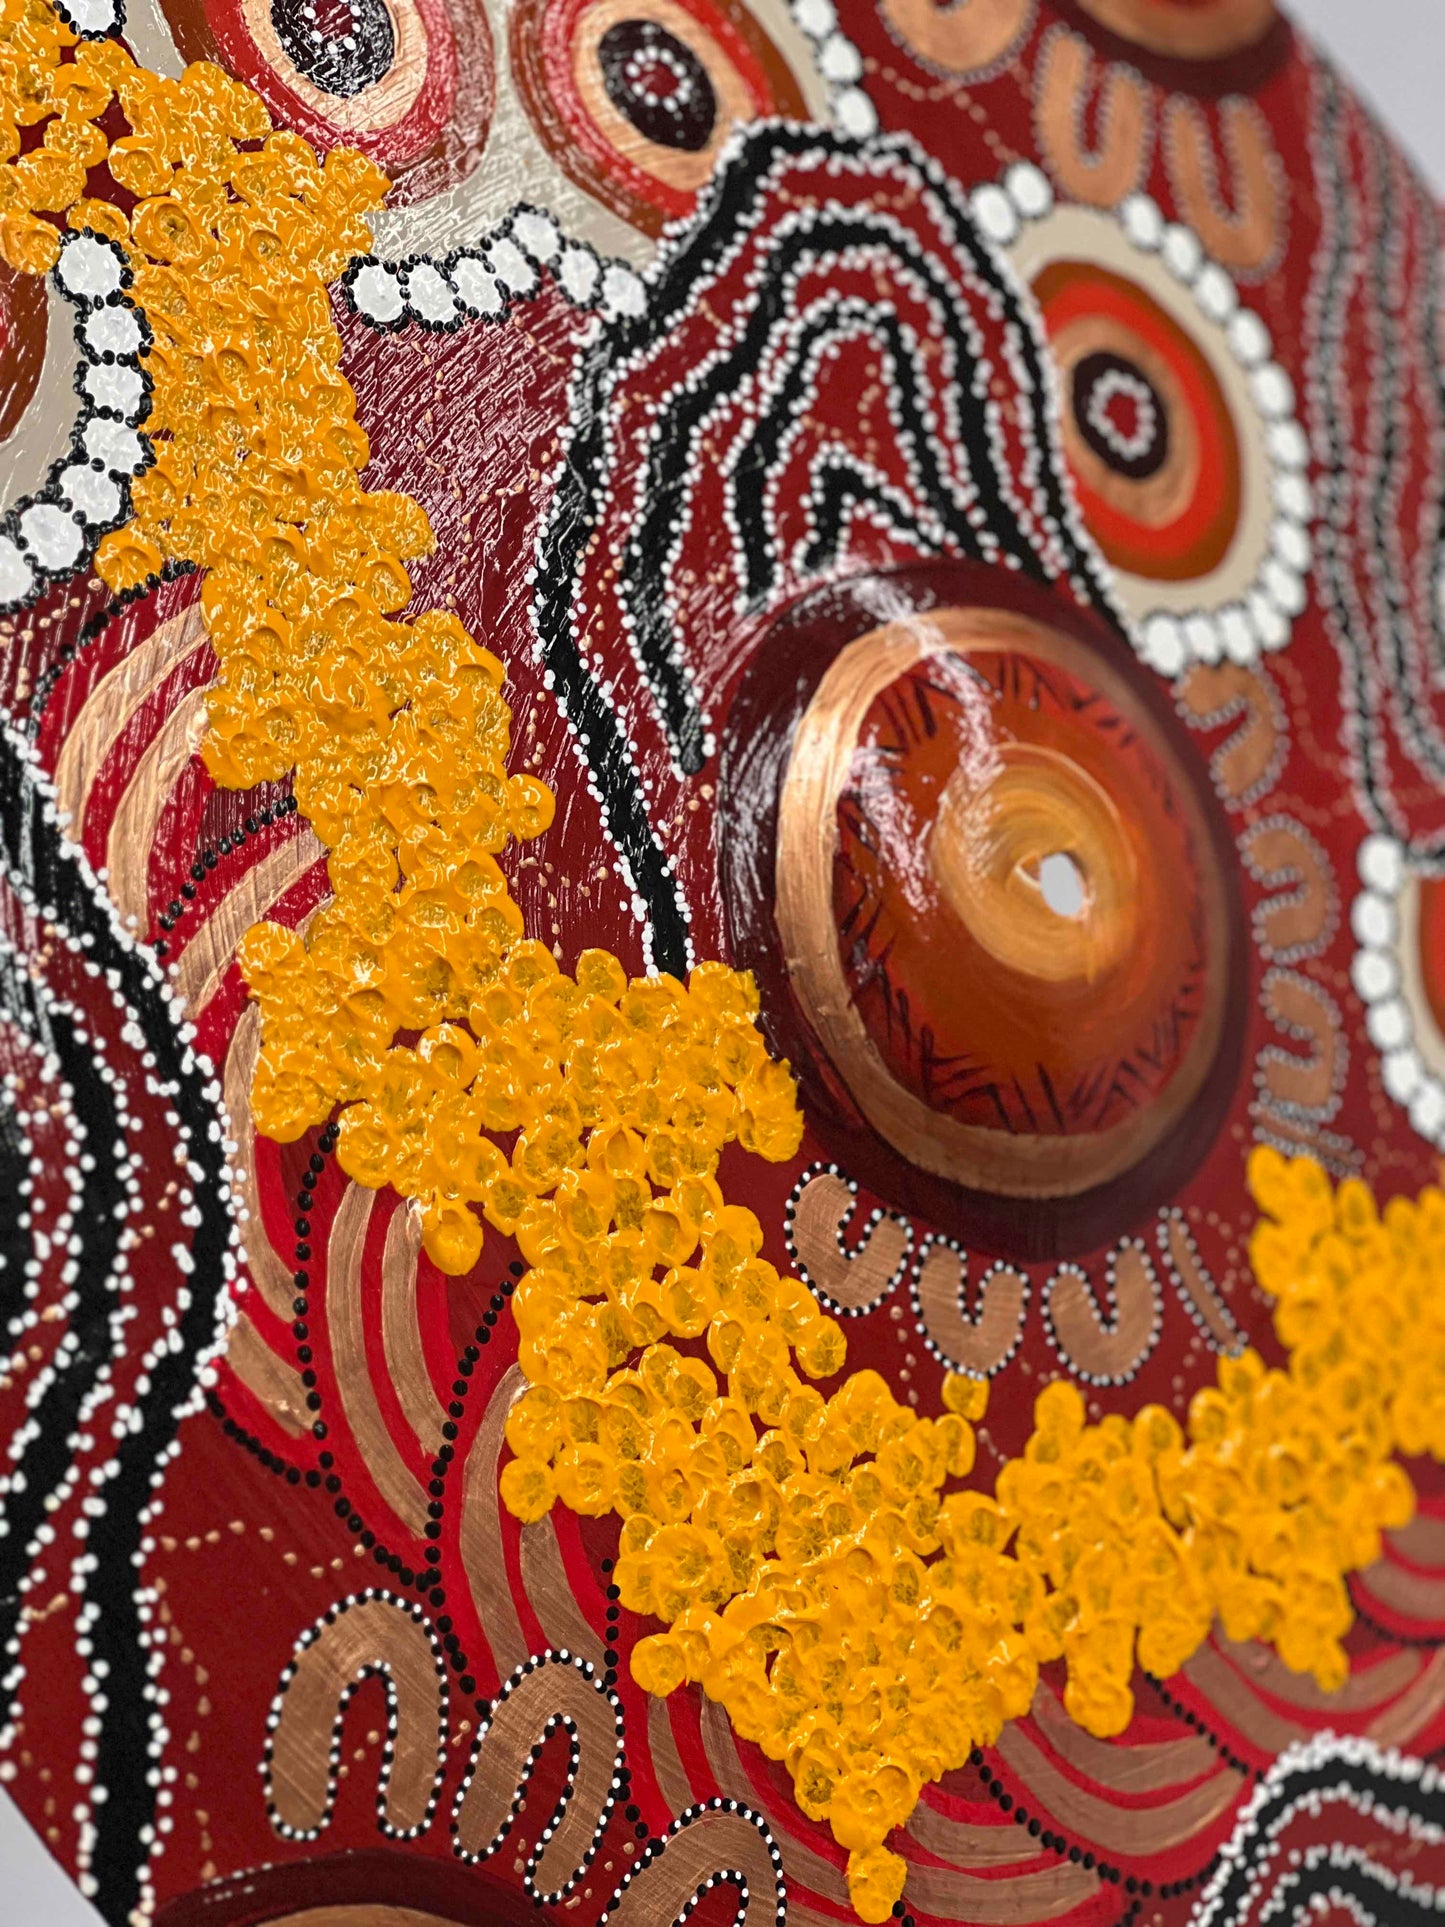 Red Cymbals Art Series 'The Journey' - Australian First Nations 19" Painted cymbal Art Piece by Simone Thomson